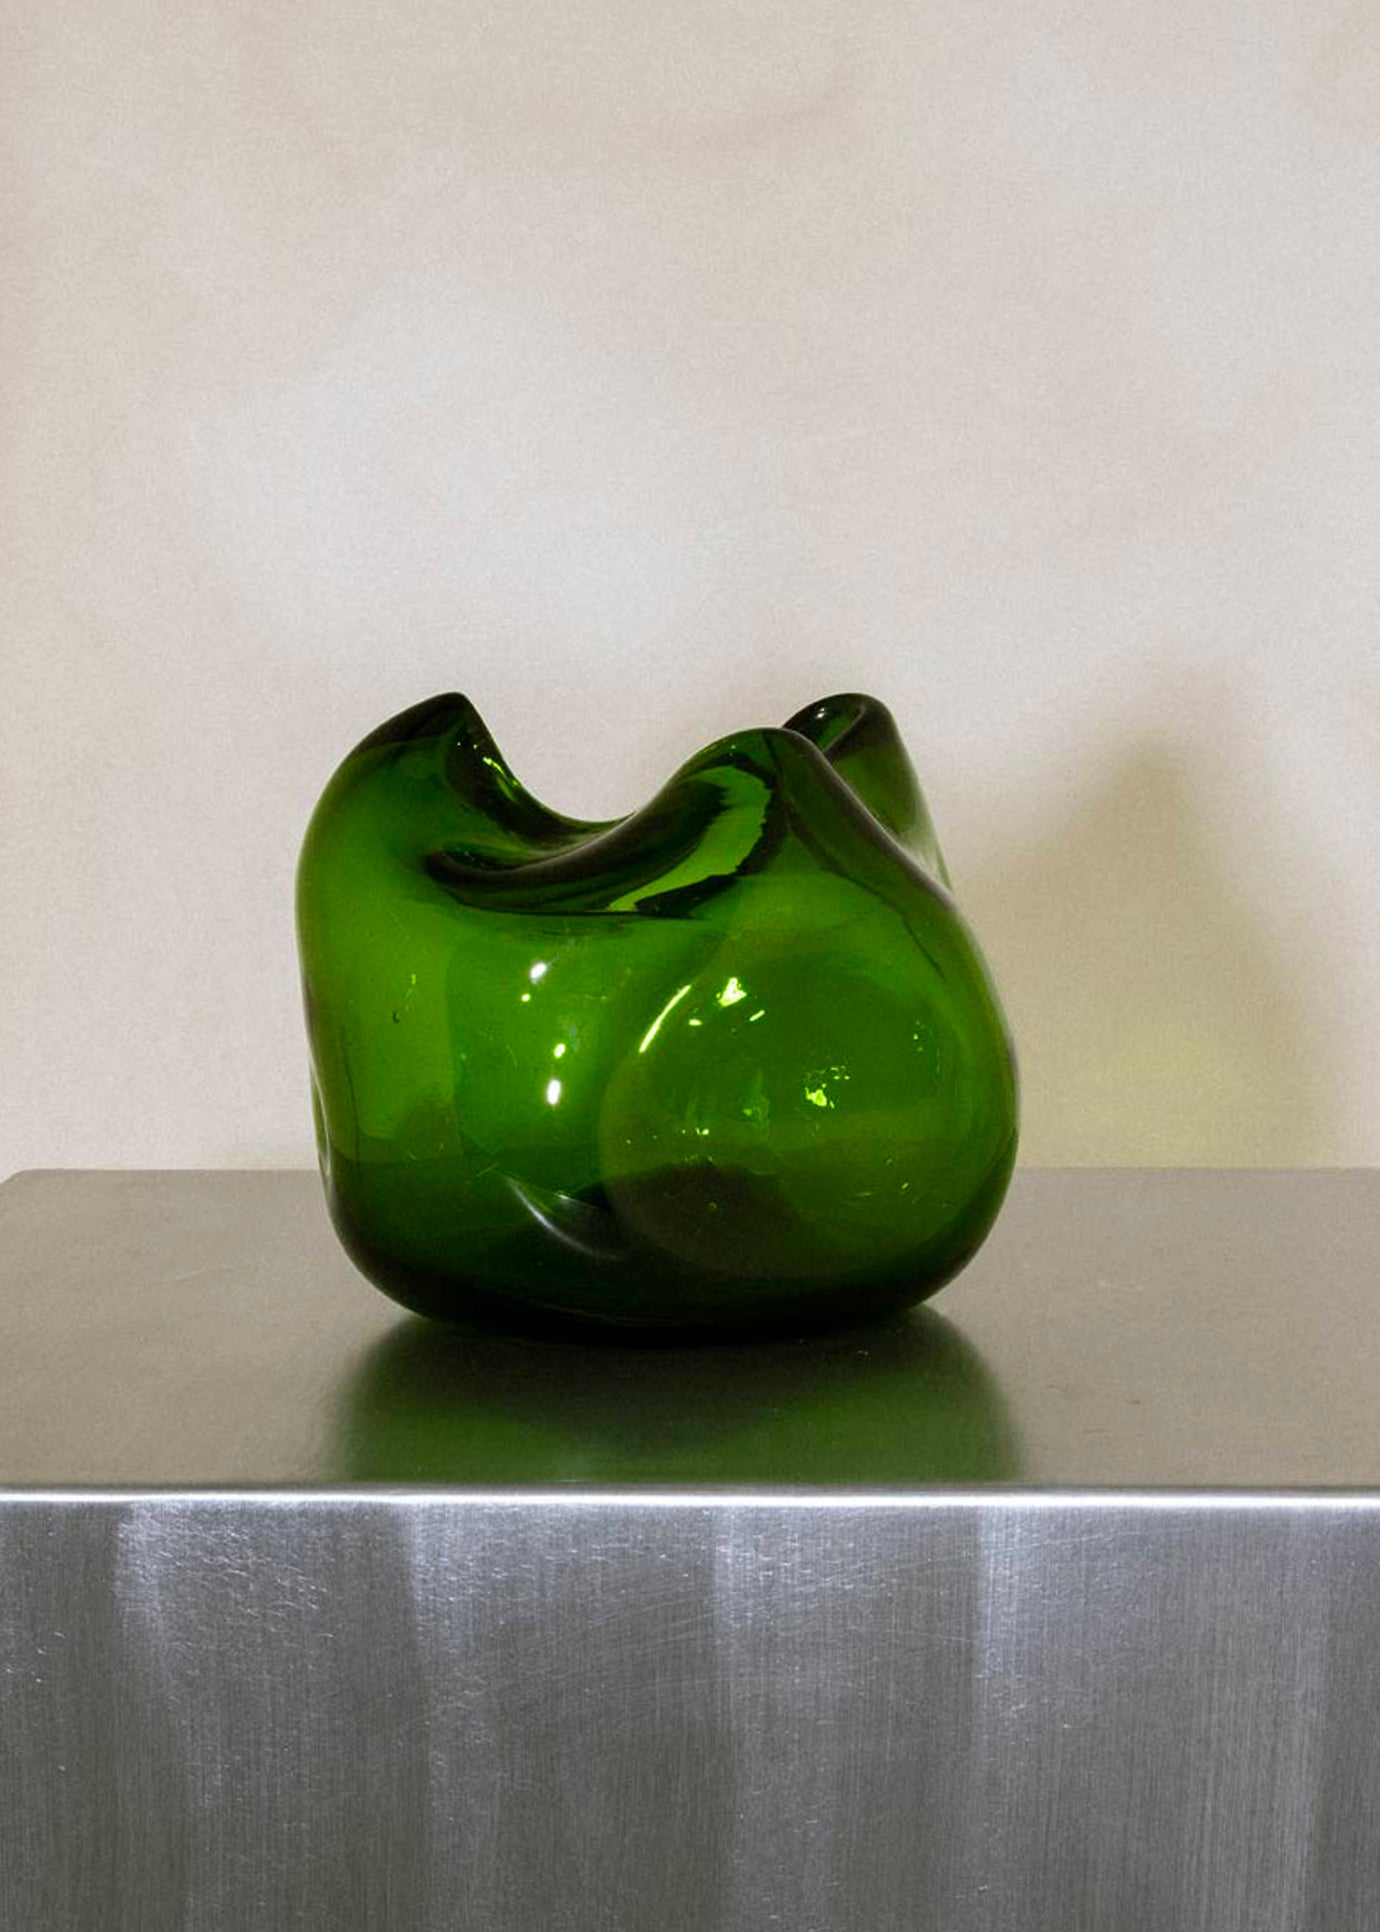 Completedworks The Bubble to End all Bubbles Vase - Green - 1